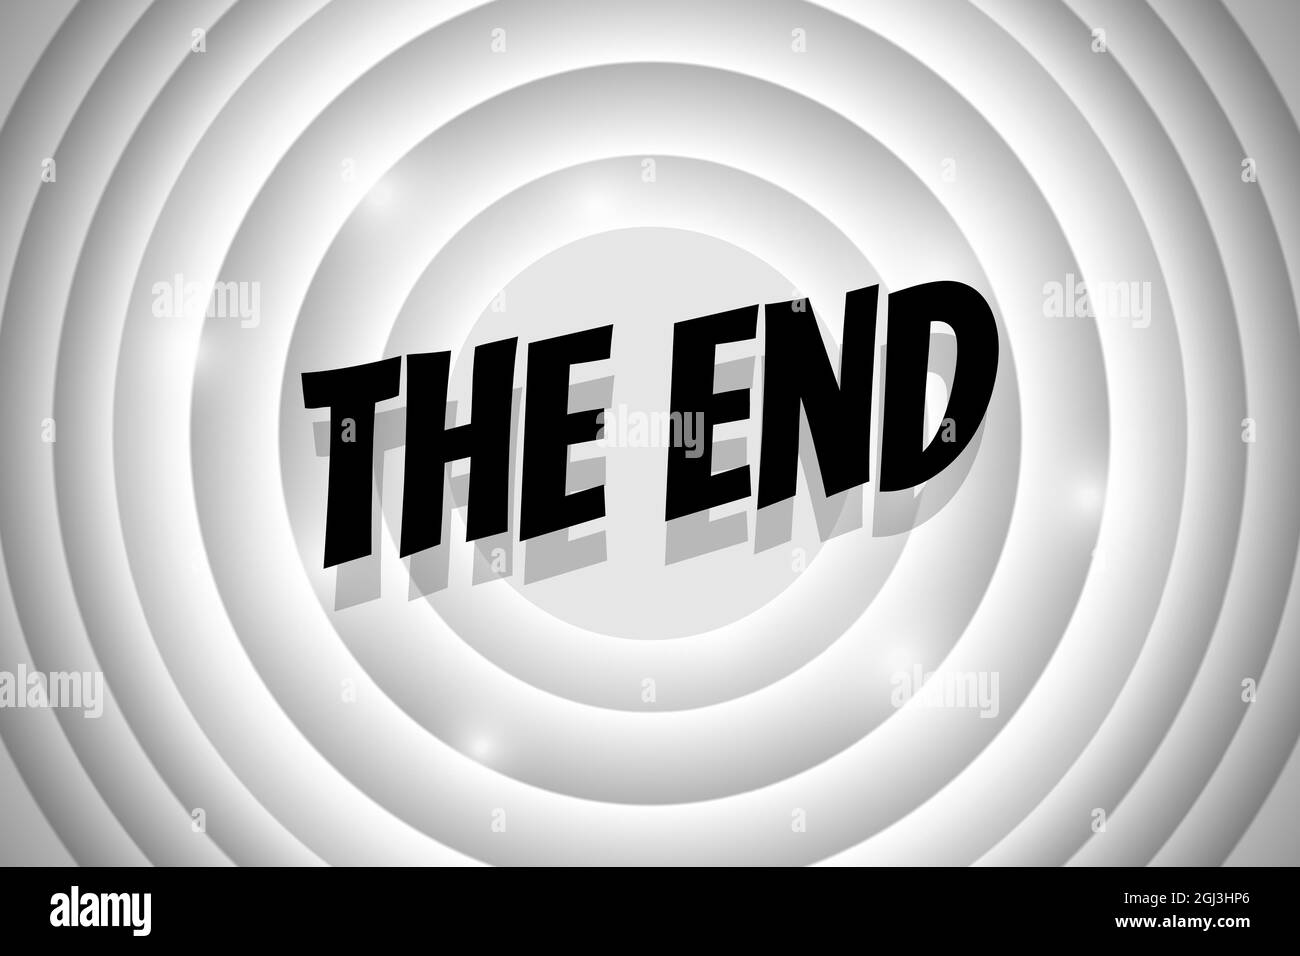 The End comic style text on white circle retro cinema screen. Black title on old silent movie ending background. Promotion message noir banner. Vector eps illustration Stock Vector